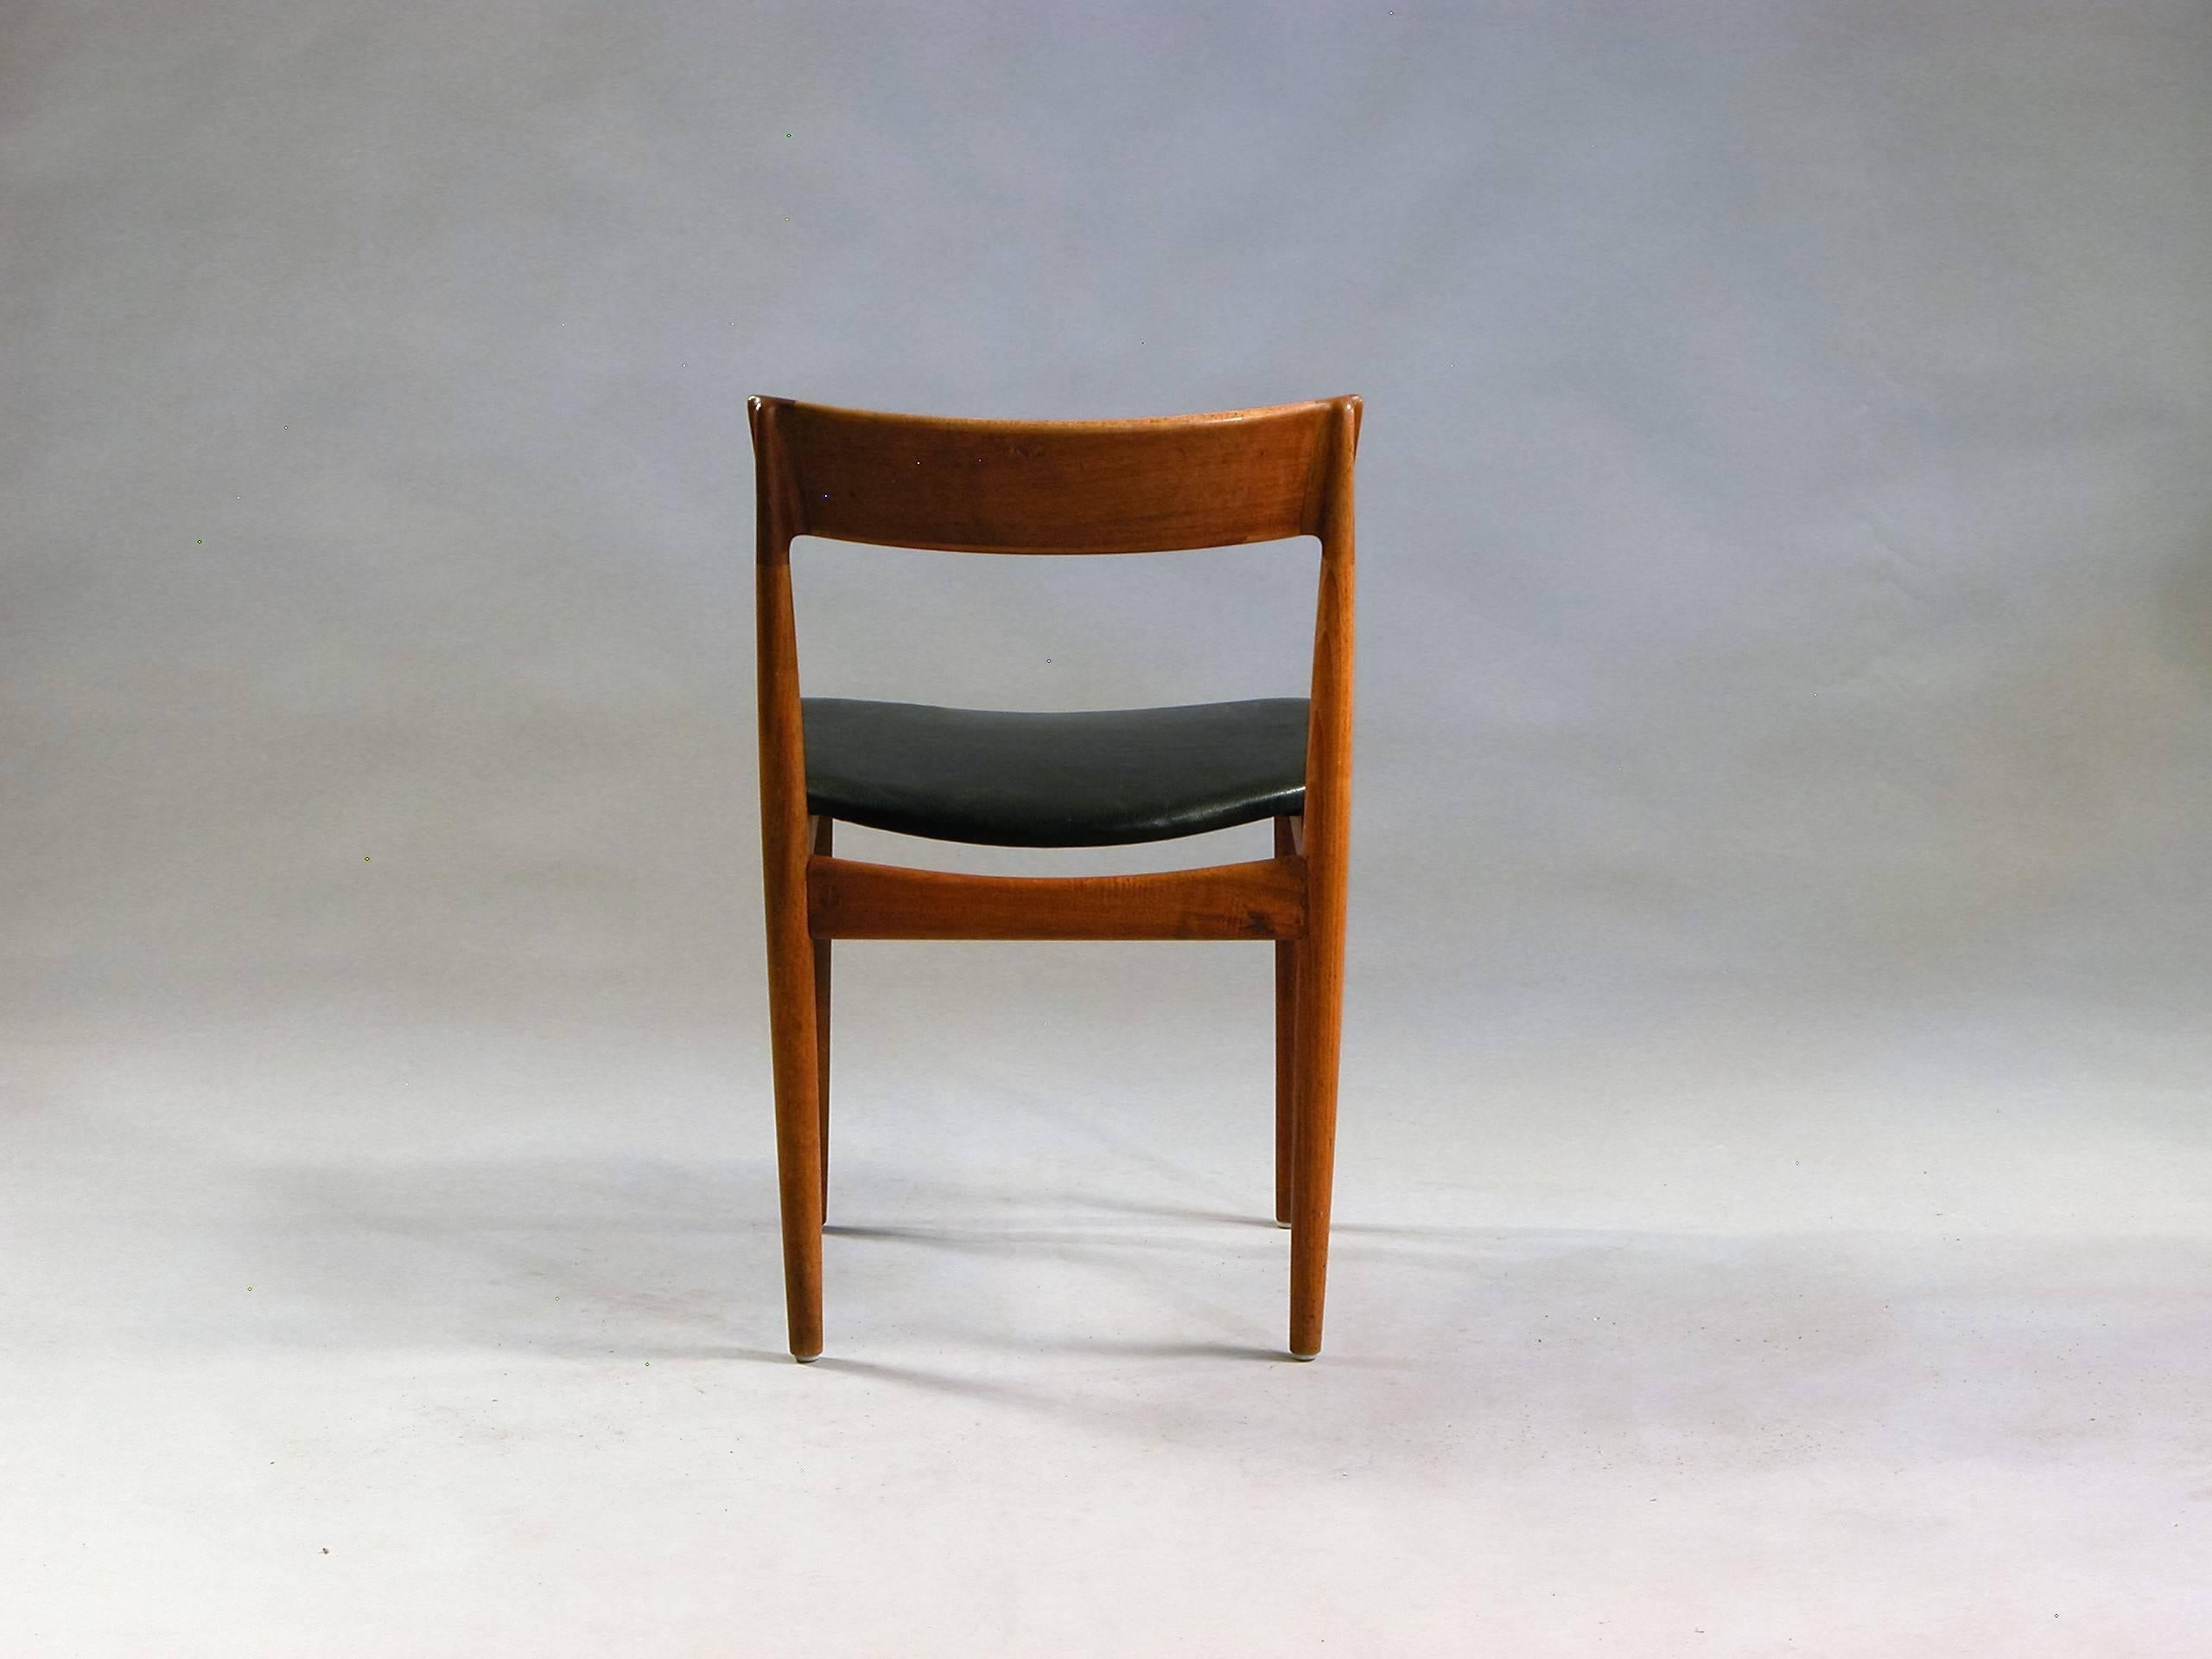 Hand-Crafted 1960s Henry Rosengren Hansen 4 Model 39 Teak Dining Chairs in Teak and Leather